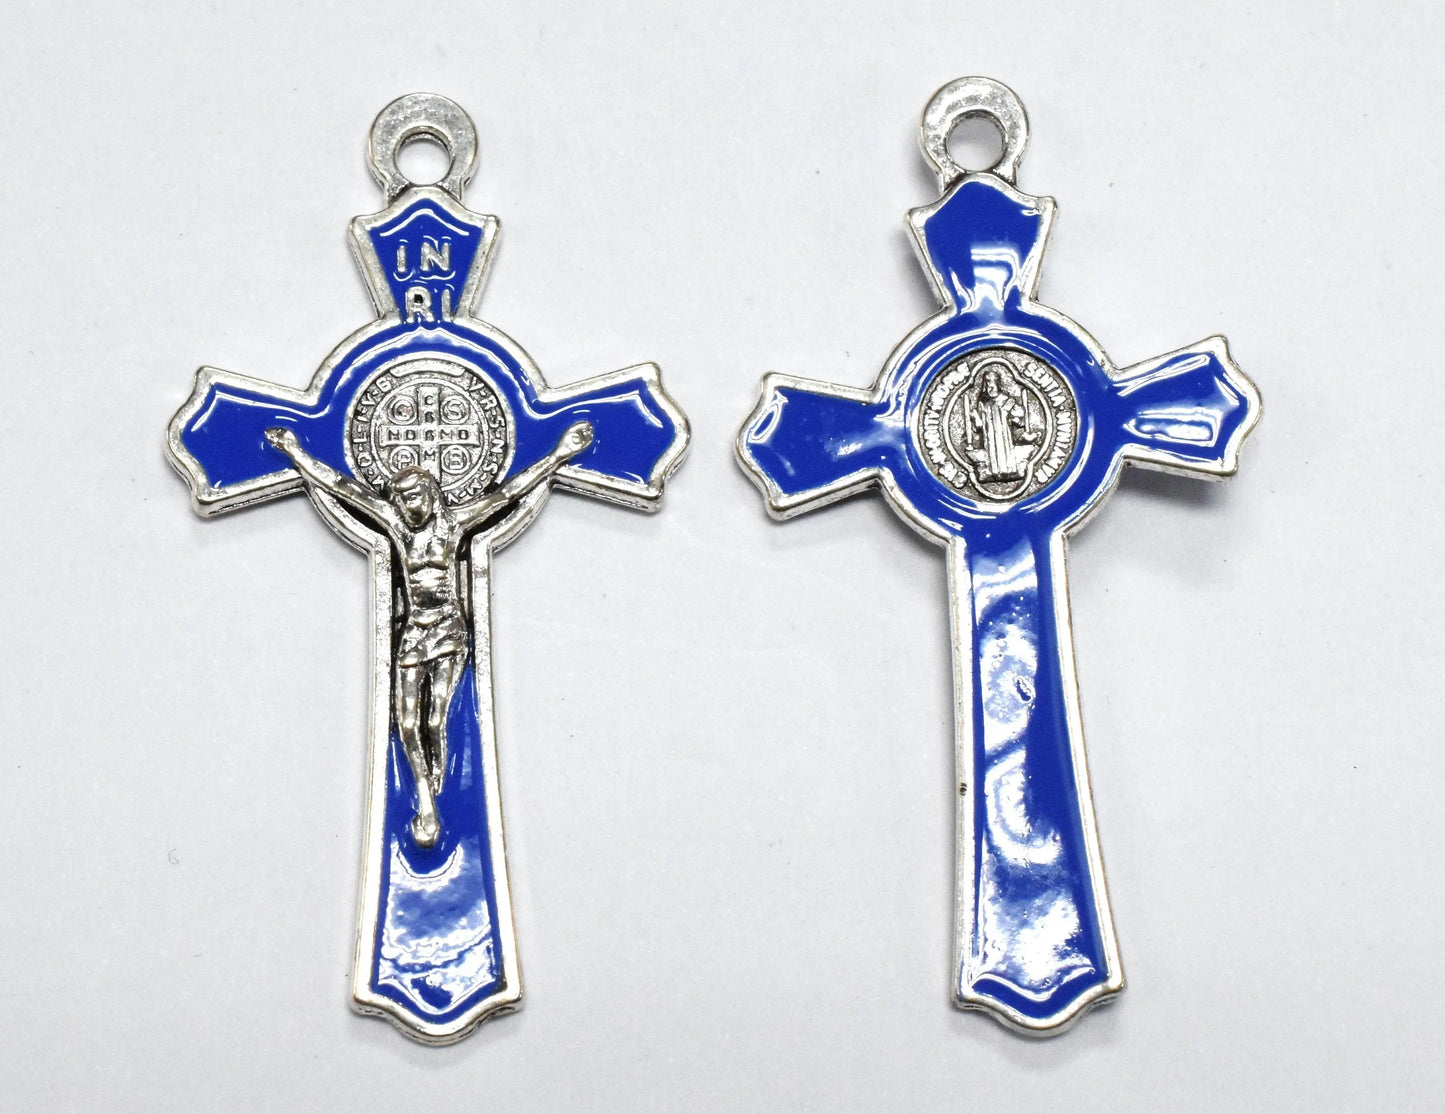 6 PCs Jesus Color Cross Charm Pendant Silver Base Metal Alloy Size 28x50mm For Jewelry Making and Wholesale White/Black/Yellow/Red/Blue - BeadsFindingDepot